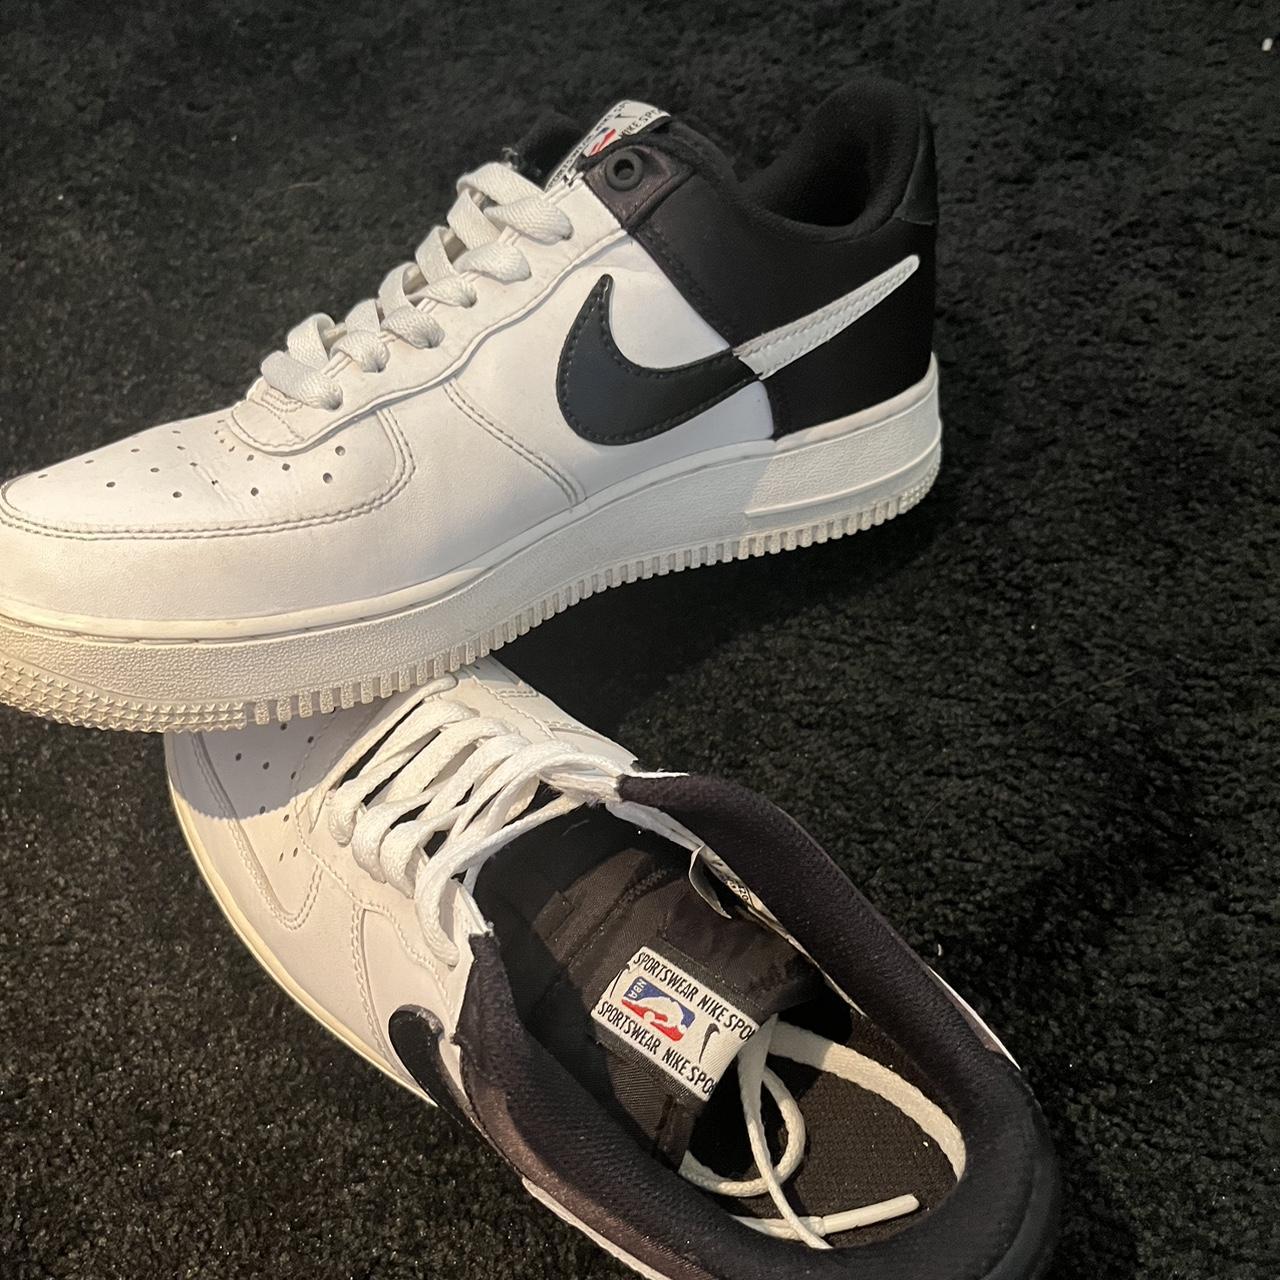 Nike Air Force 1 Low x NBA Spurs 2019 for Sale, Authenticity Guaranteed